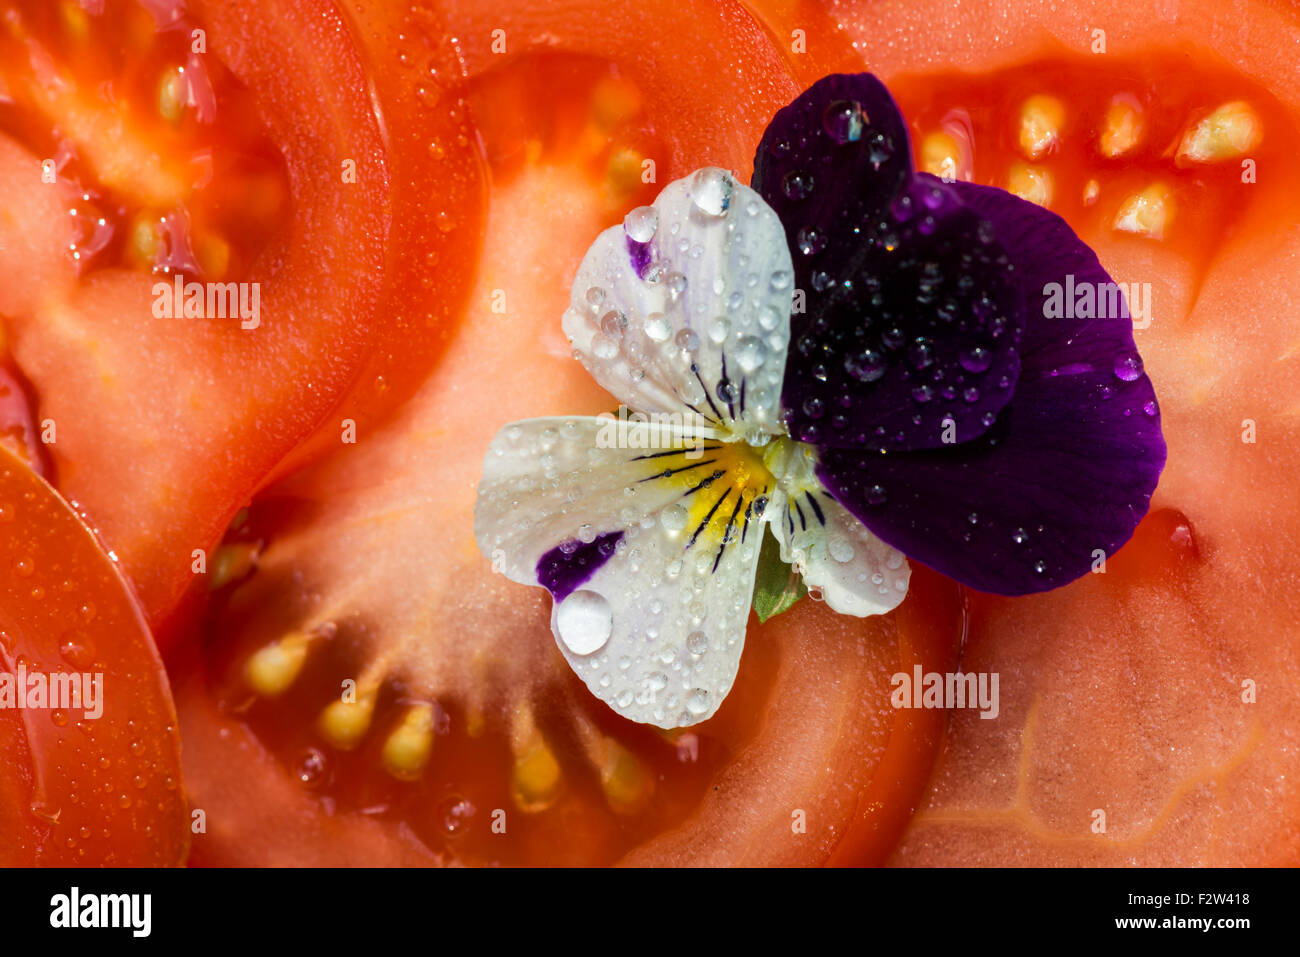 Tomato with violet with waterdrops. Stock Photo